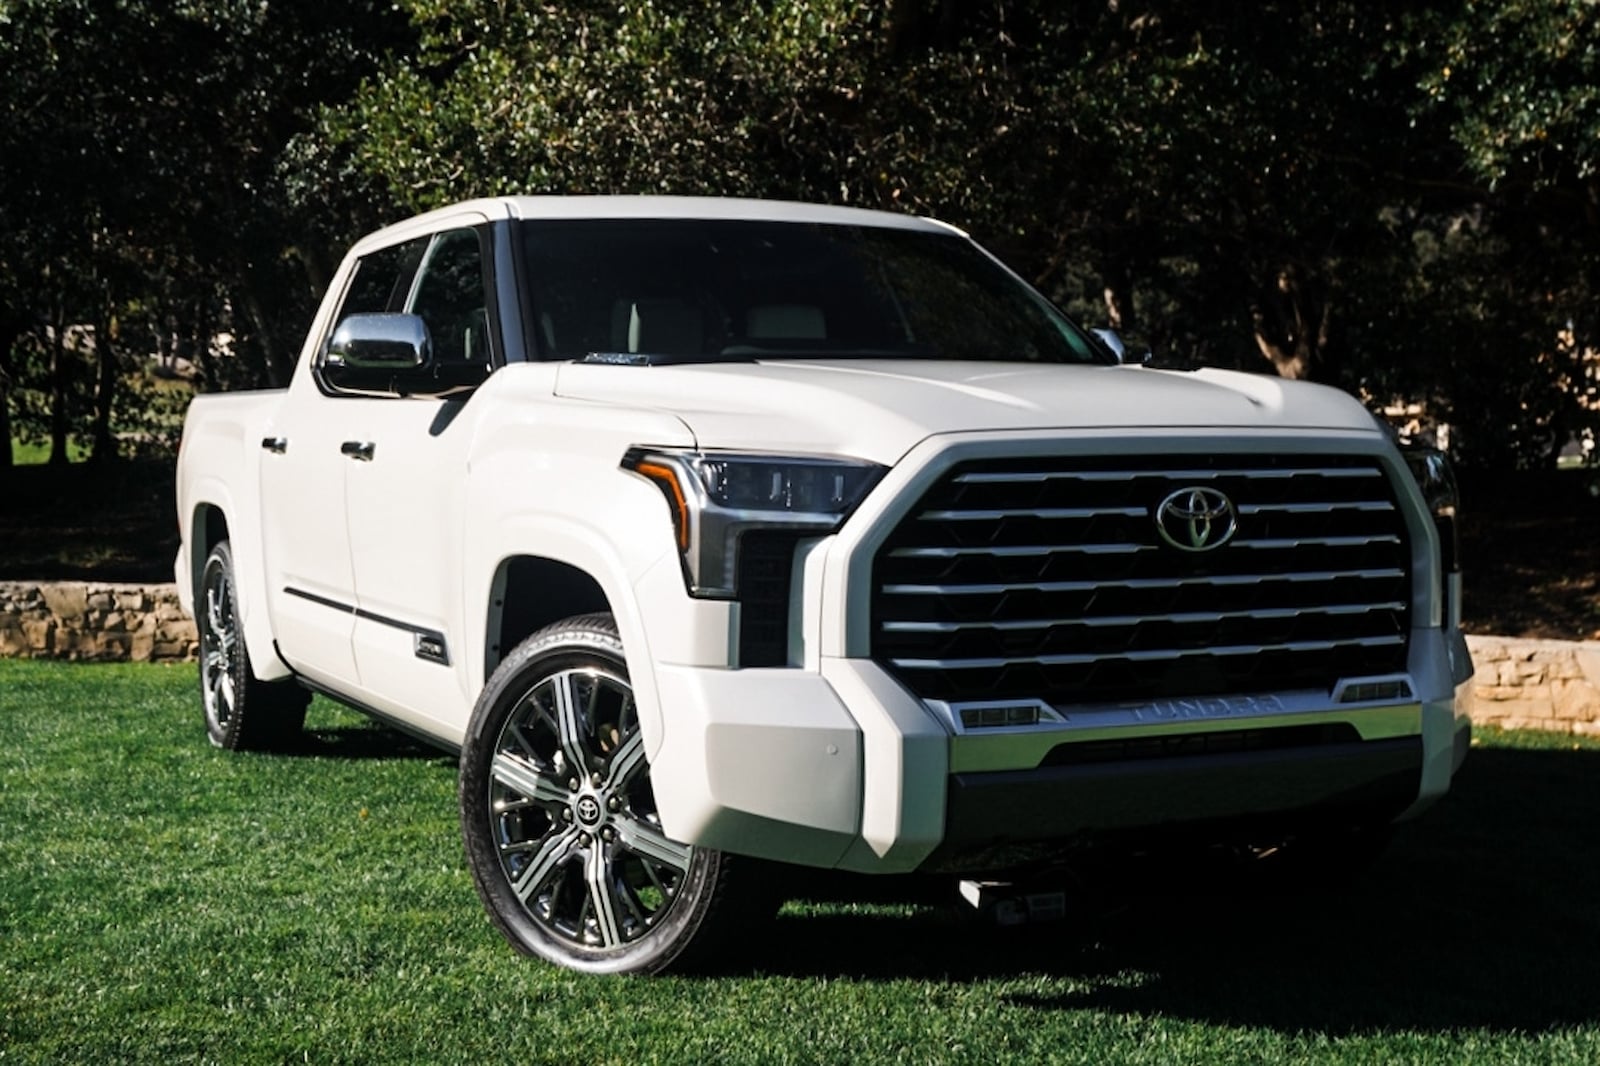 Toyota Built The New Tundra To Last One Million Miles